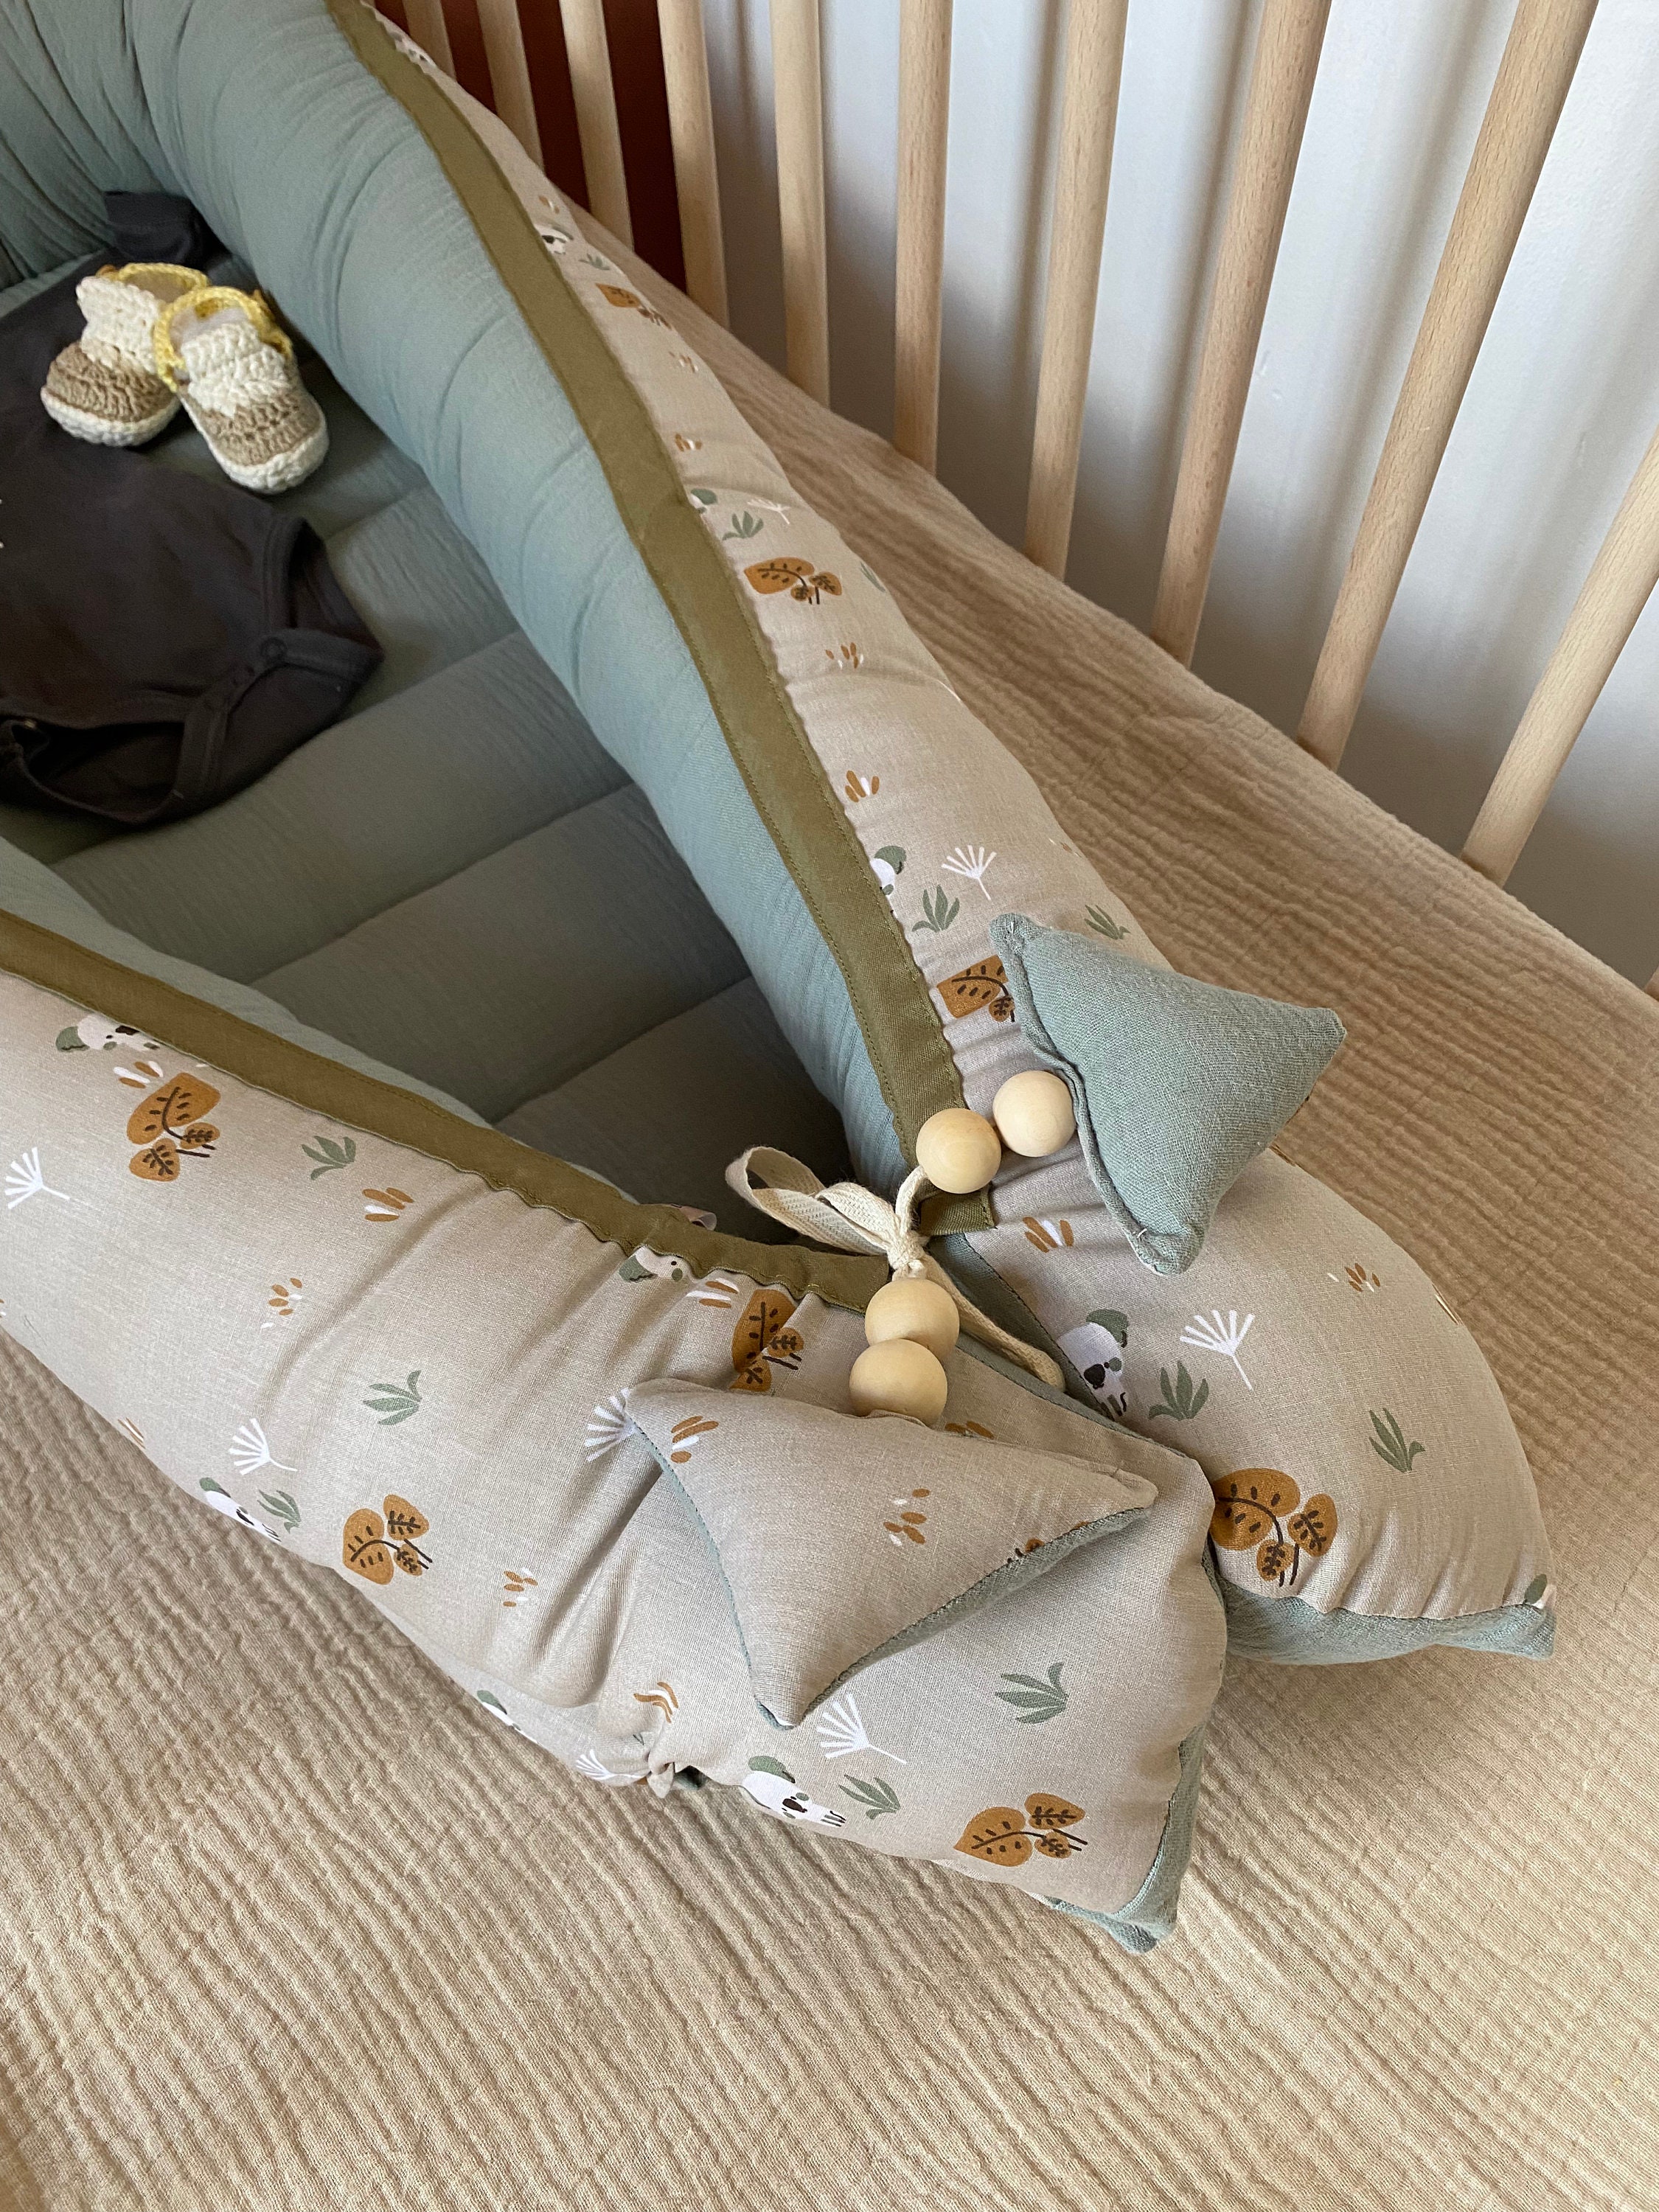 Reversible baby nest, baby cocoon, bed reducer, babynest